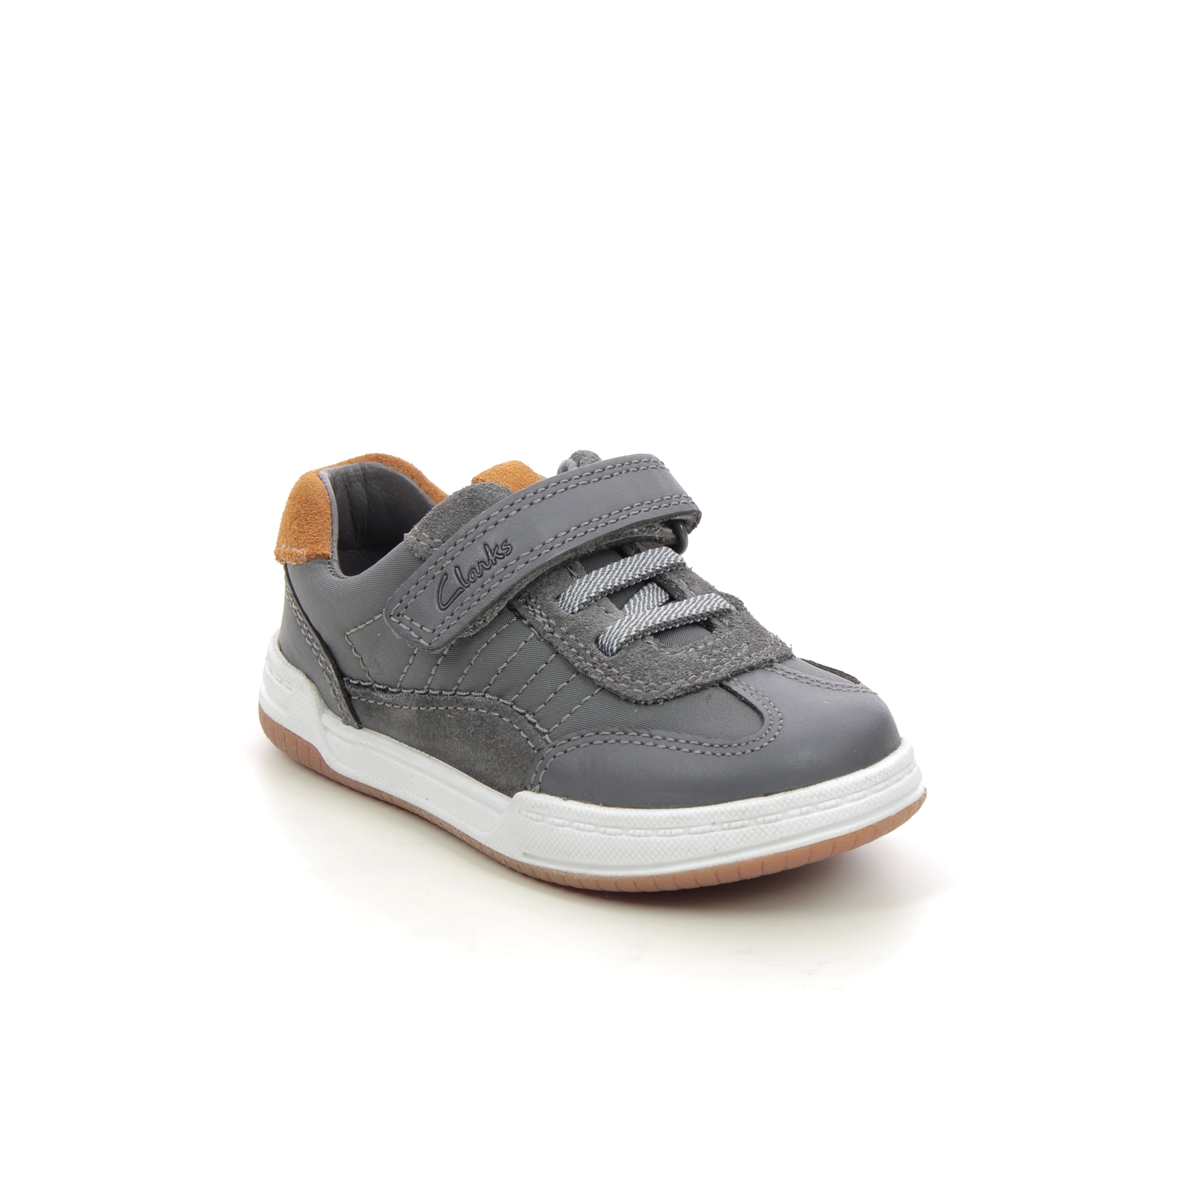 Clarks Fawn Family T Grey Leather Kids Boys Toddler Shoes 751286F In Size 4.5 In Plain Grey Leather F Width Fitting Regular Fit For kids